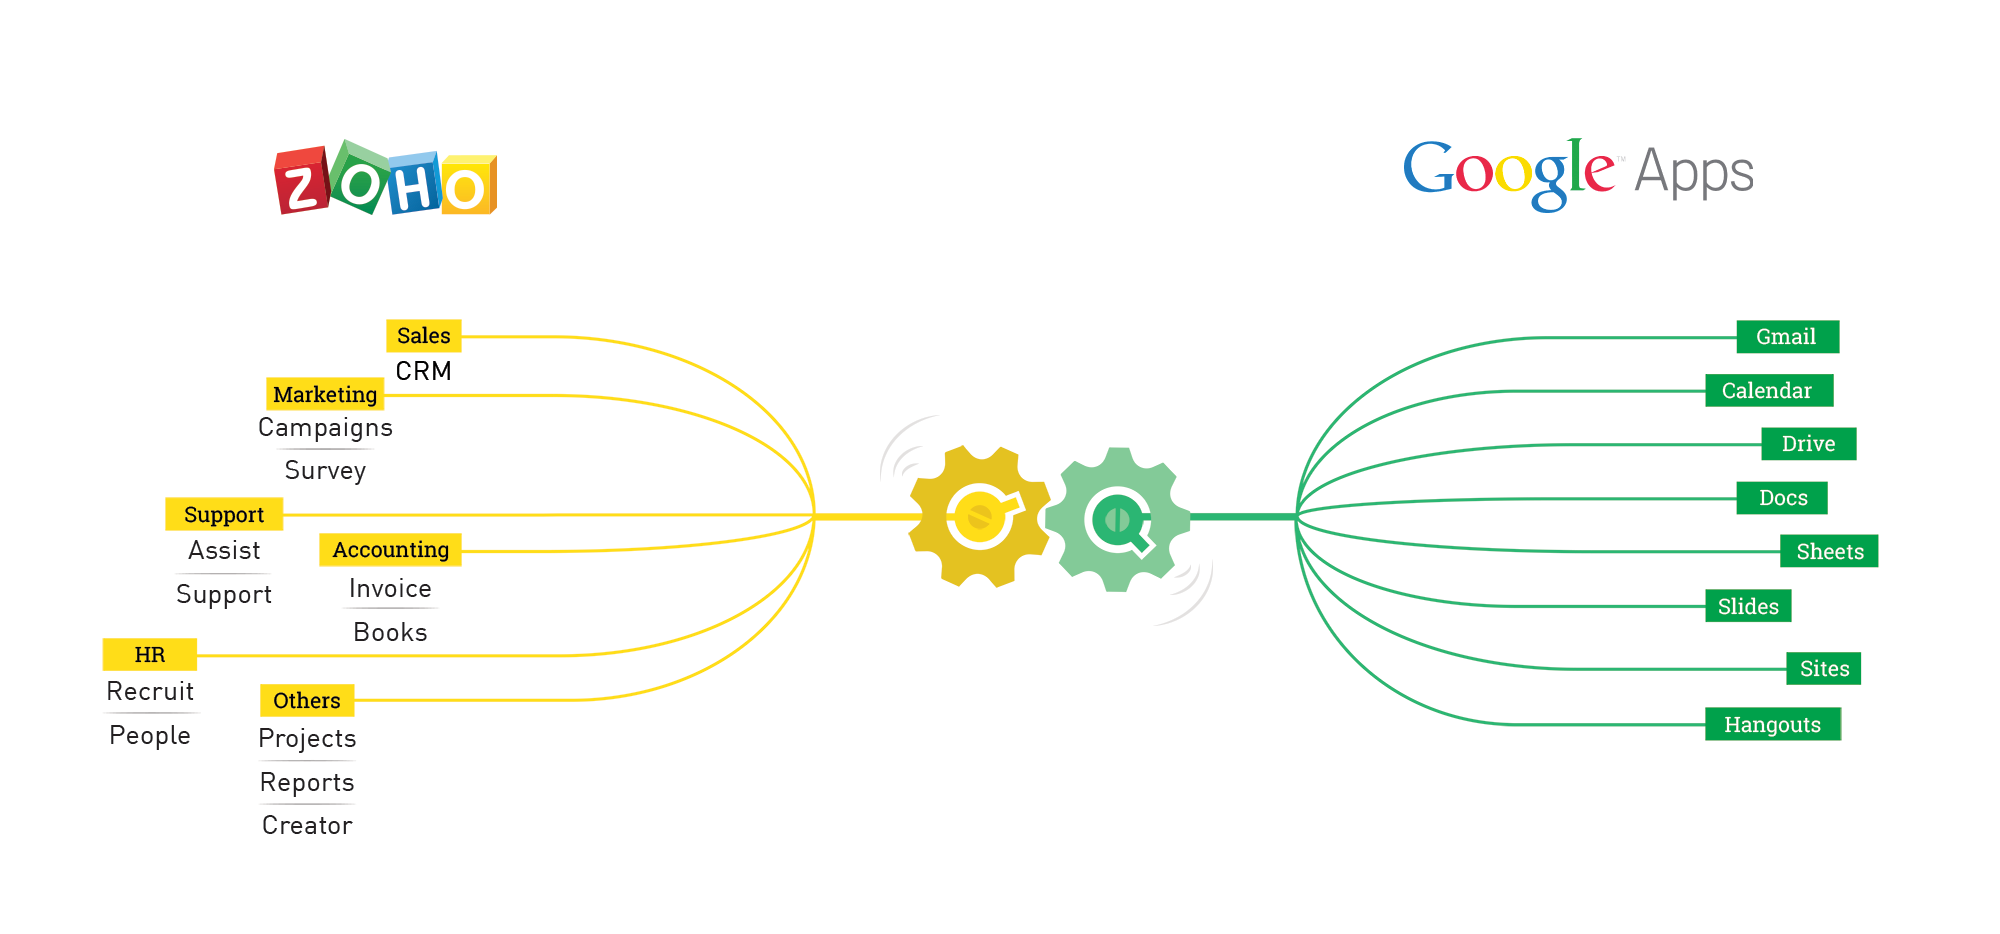 Zoho and Google Apps